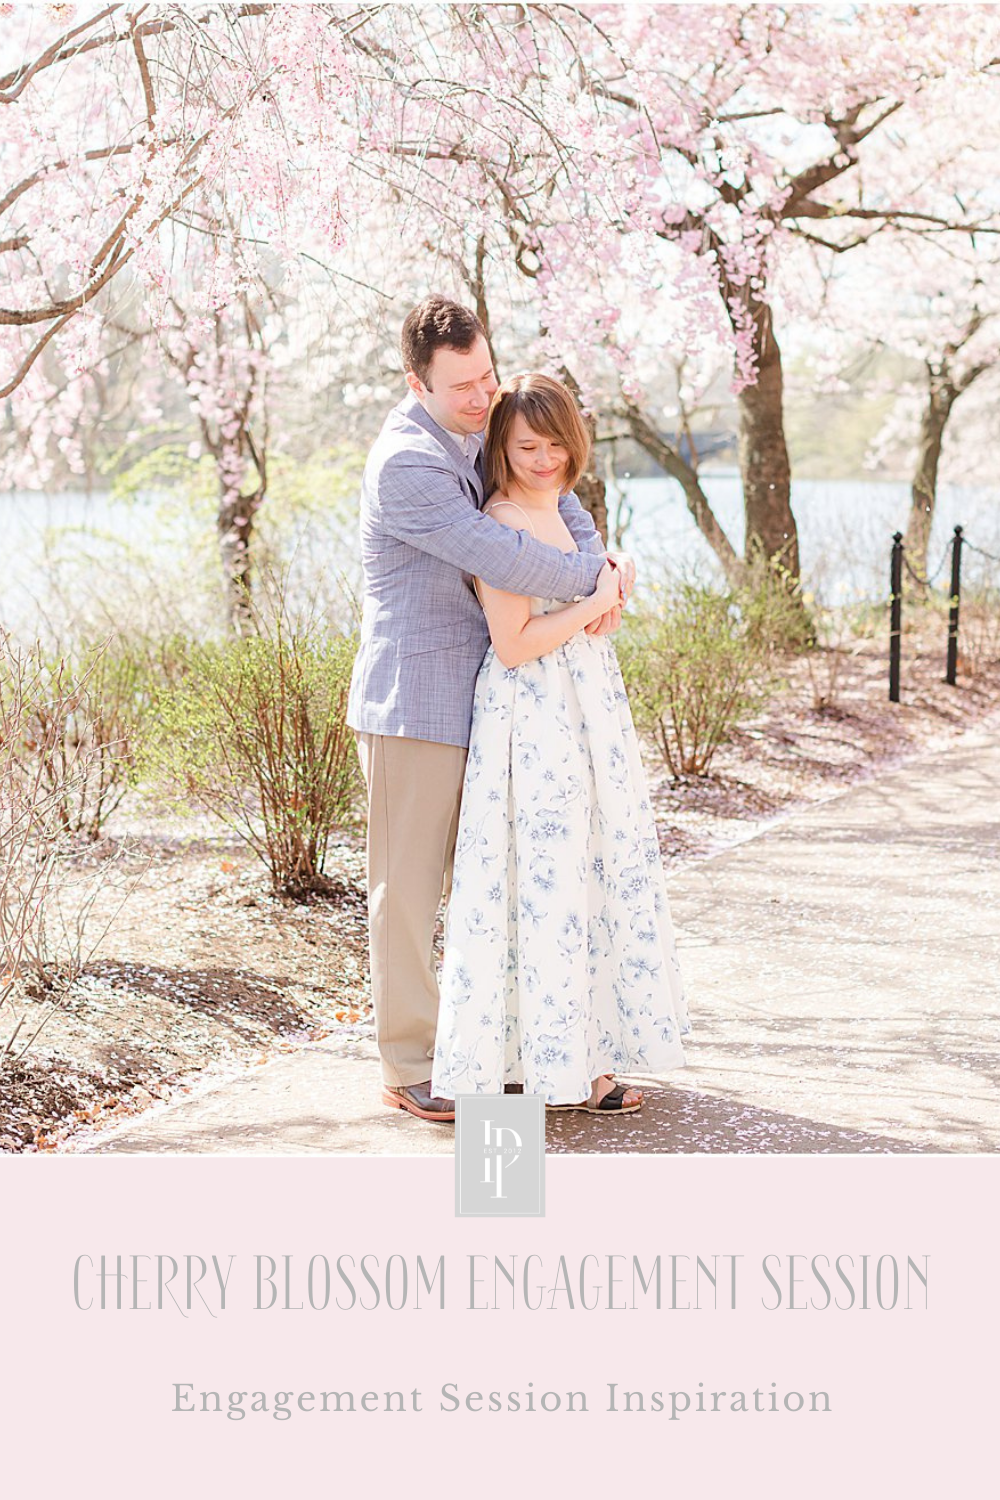 Cherry blossom Branch Brook Park engagement session in the springtime with NJ wedding photographer Idalia Photography